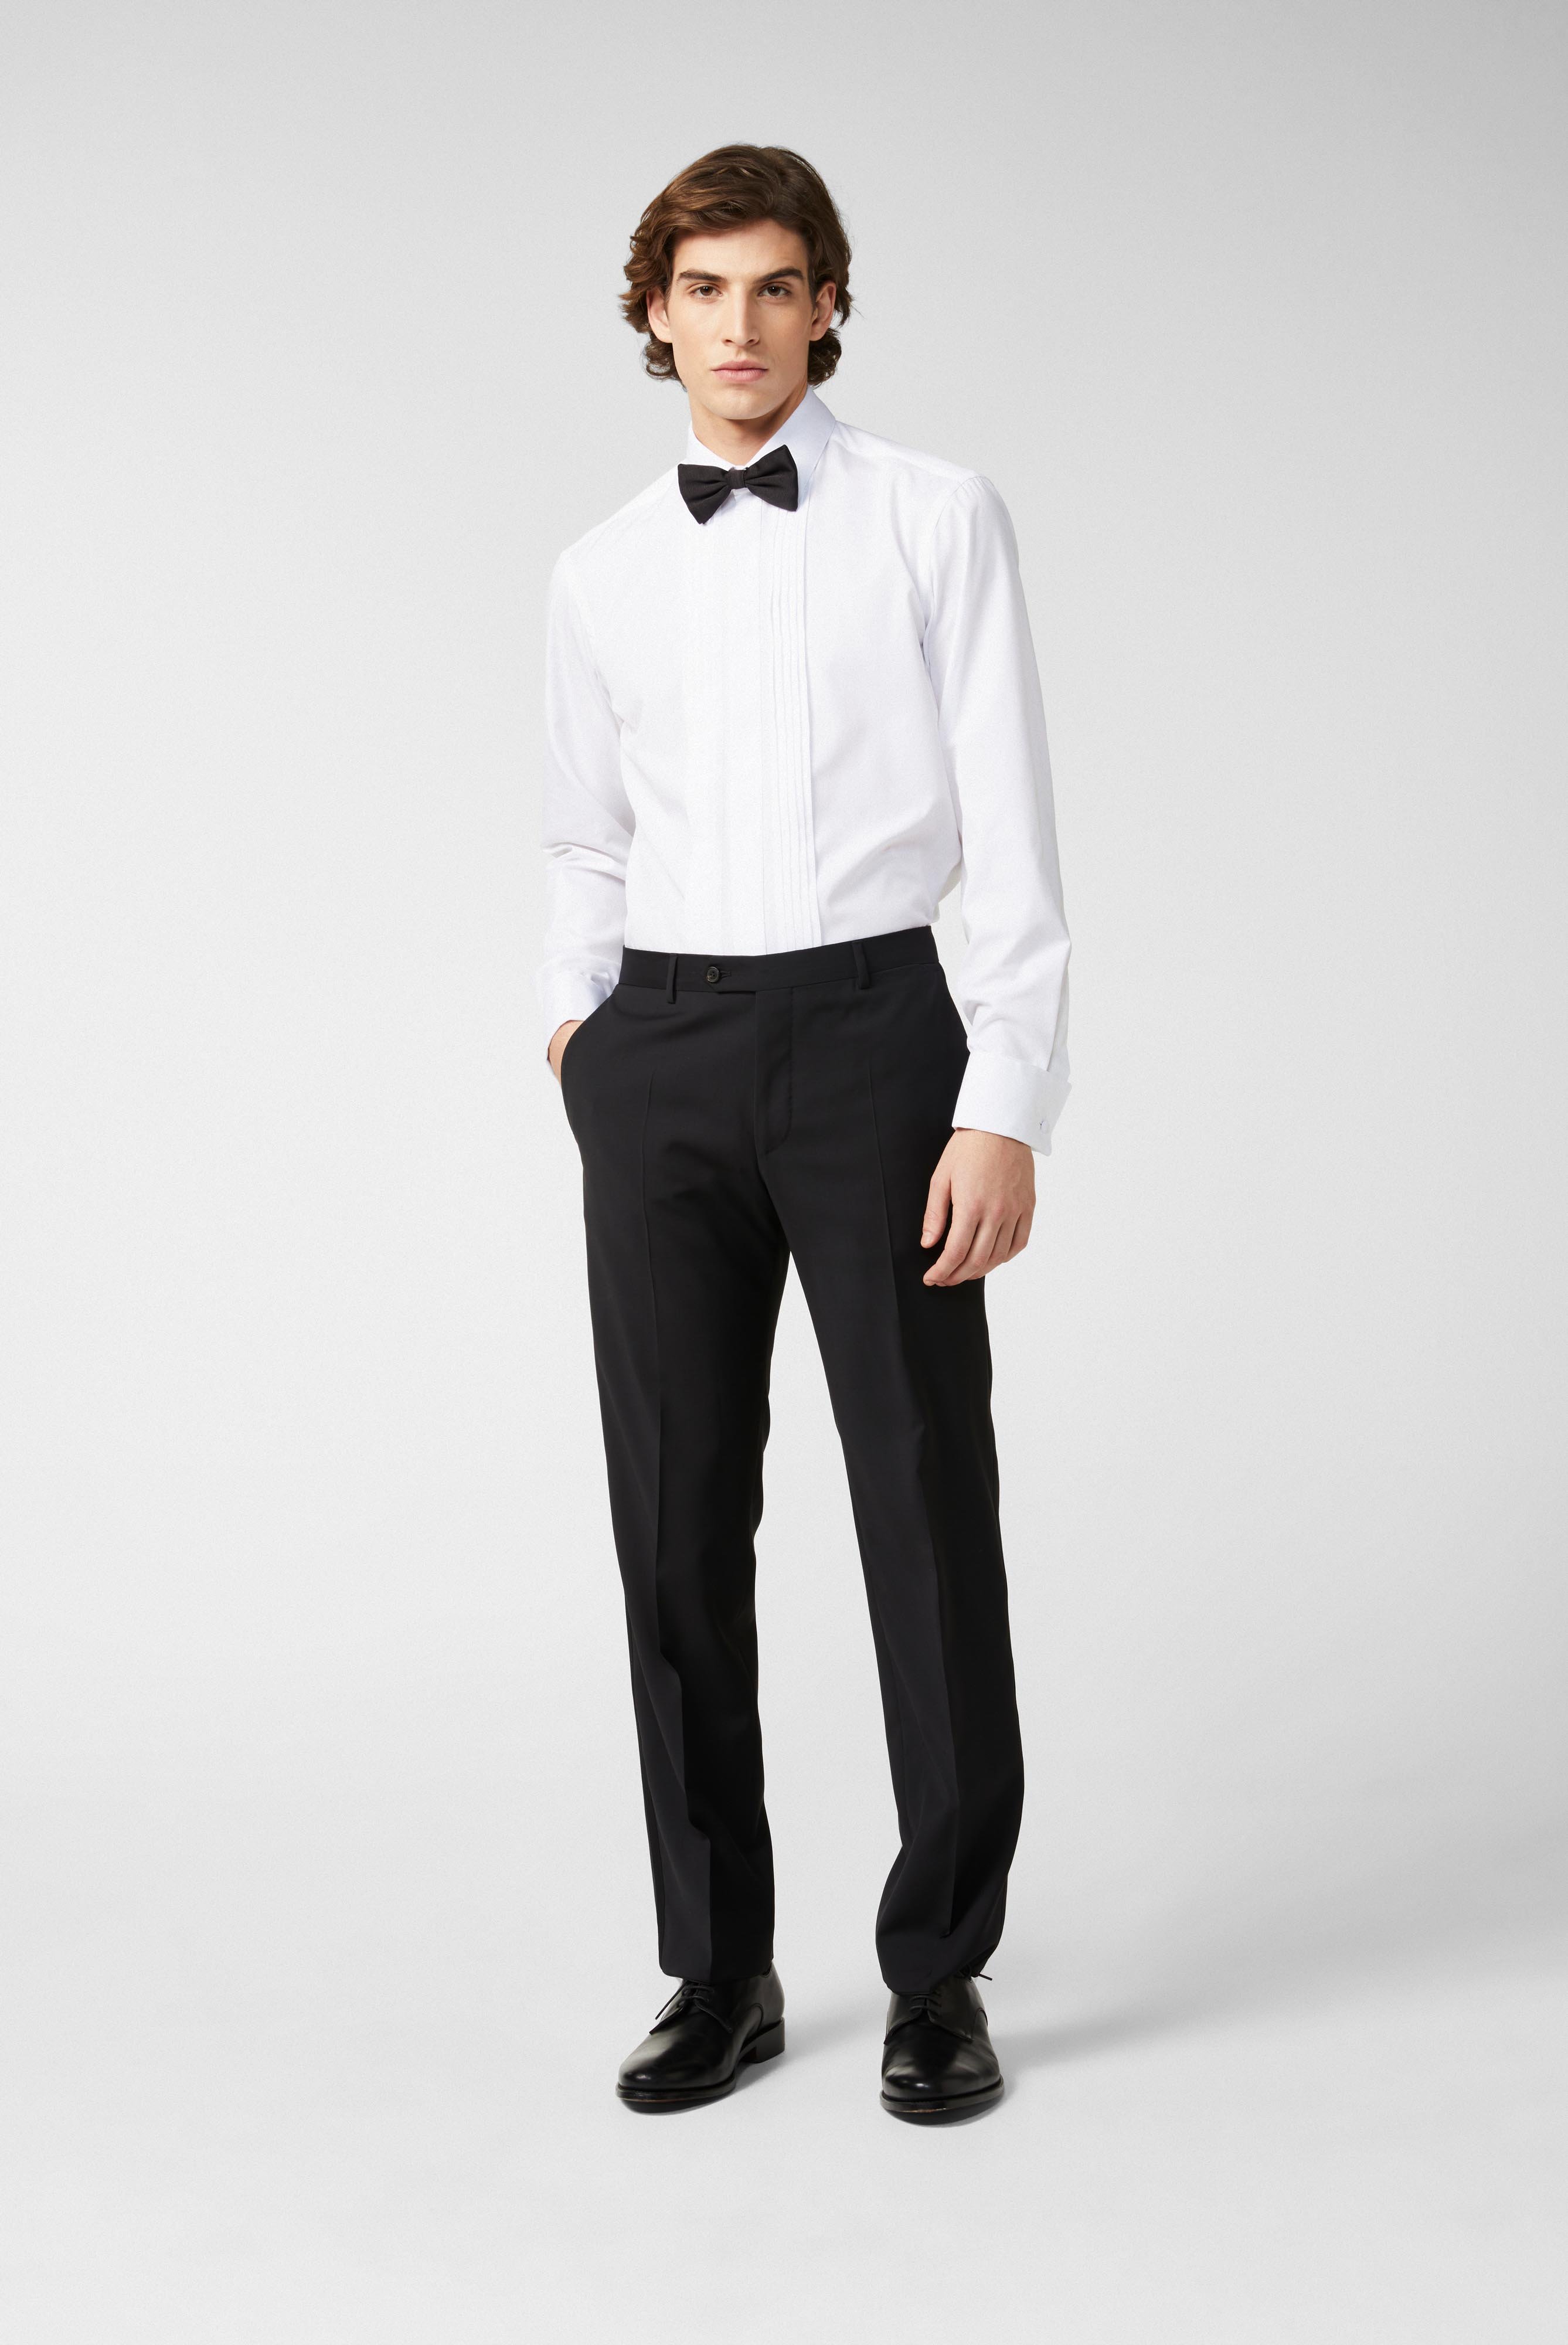 Business Shirts+Tuxedo Shirt with Pleated Panel Tailor Fit+20.2066.NV.130648.000.37